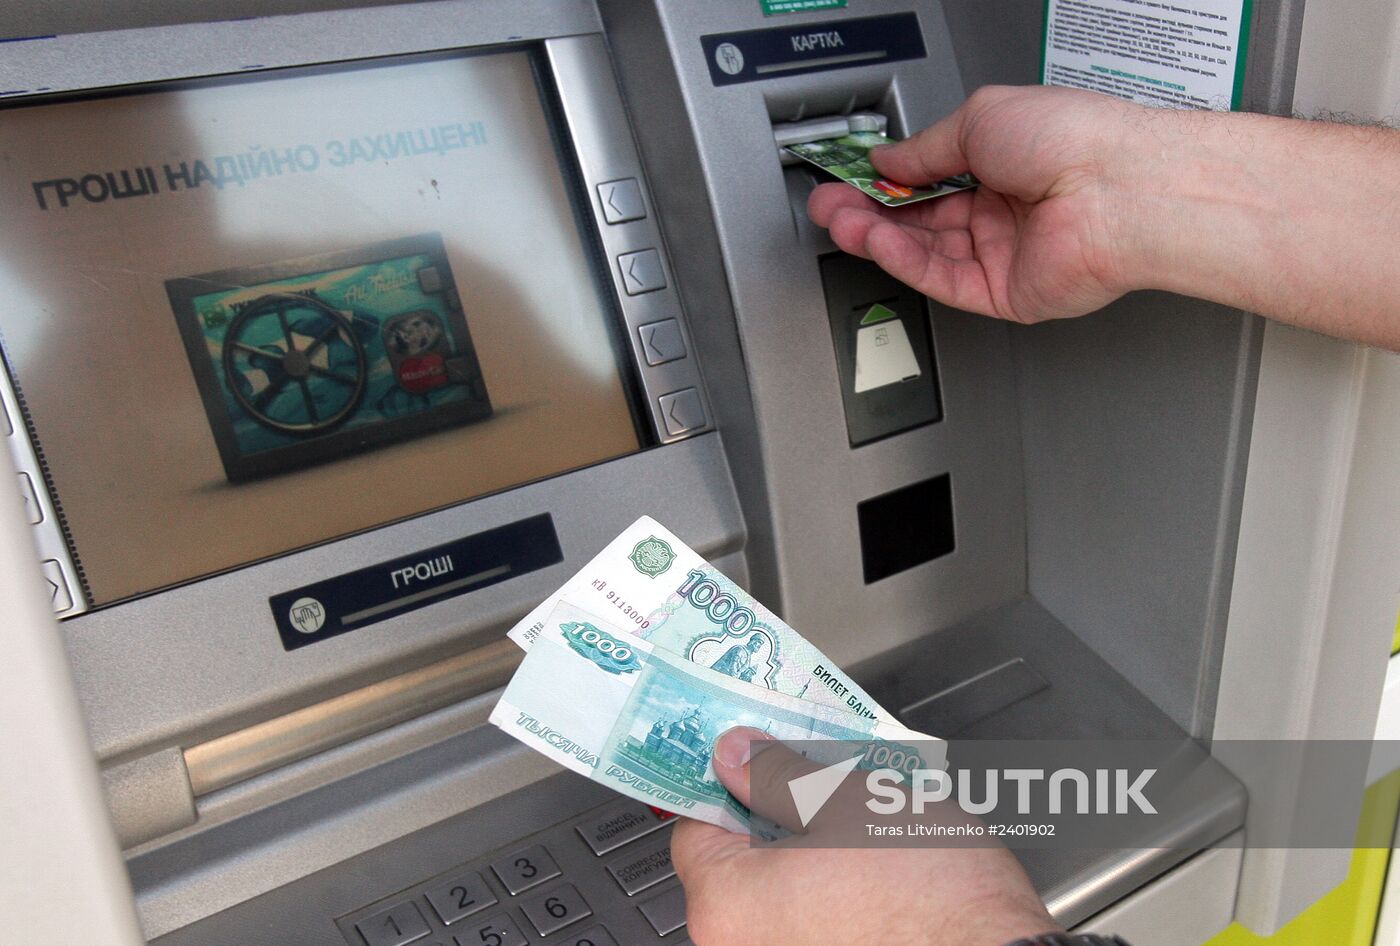 Russian ruble becomes official currency in Crimea